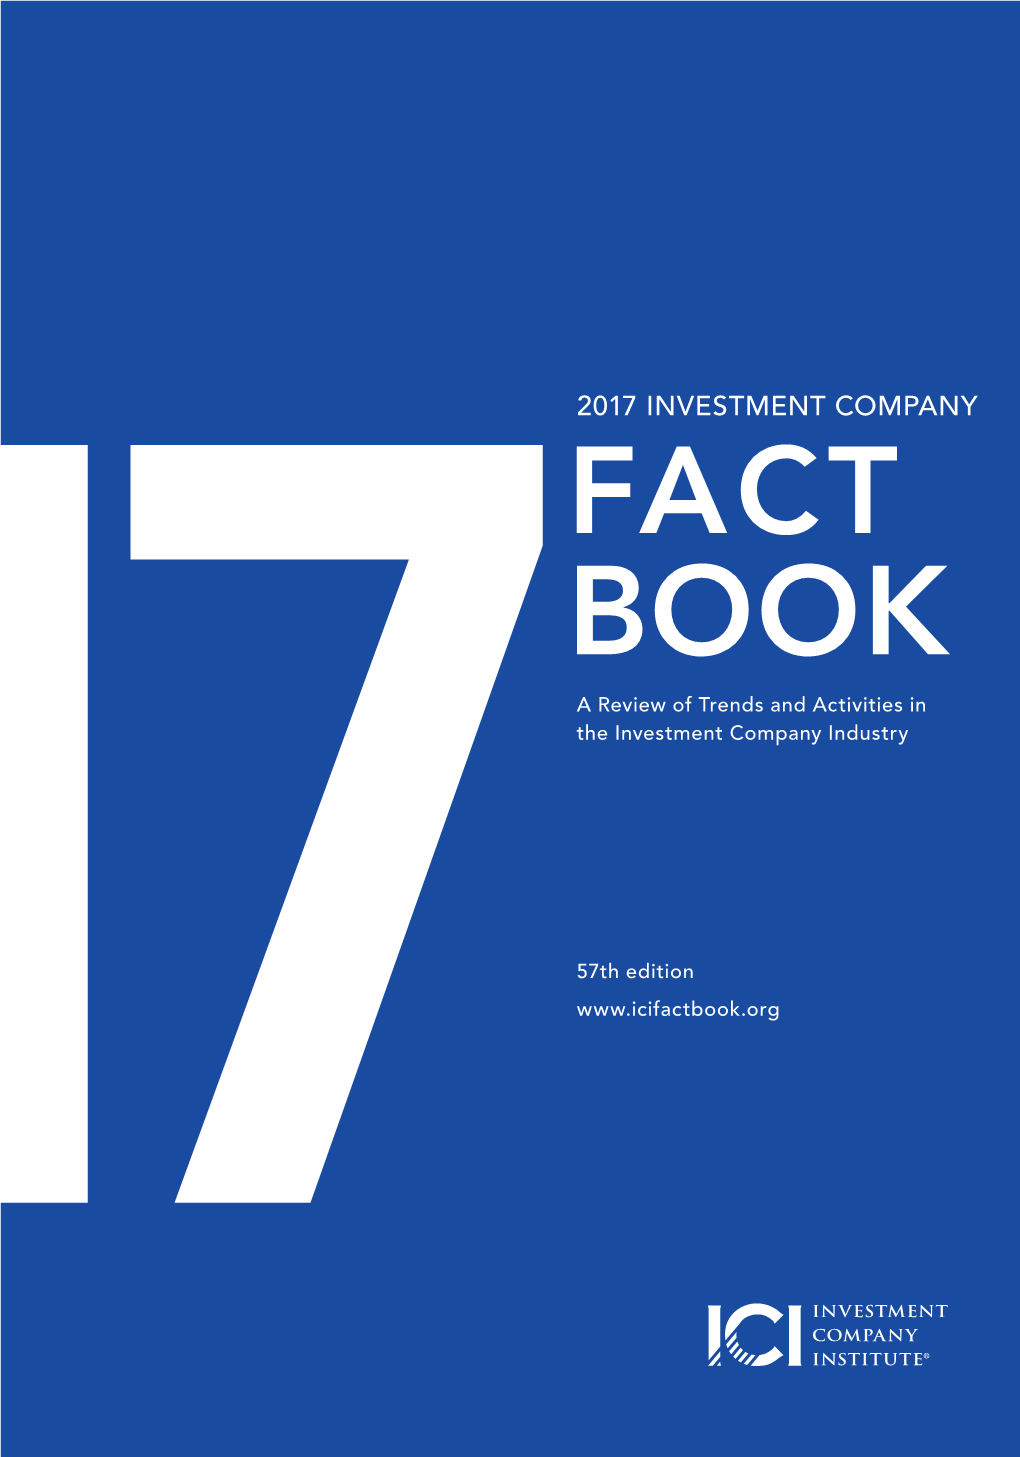 2017 INVESTMENT COMPANY FACT BOOK 2017 COMPANY INVESTMENT FACT BOOK a Review of Trends and Activities in the Investment Company Industry